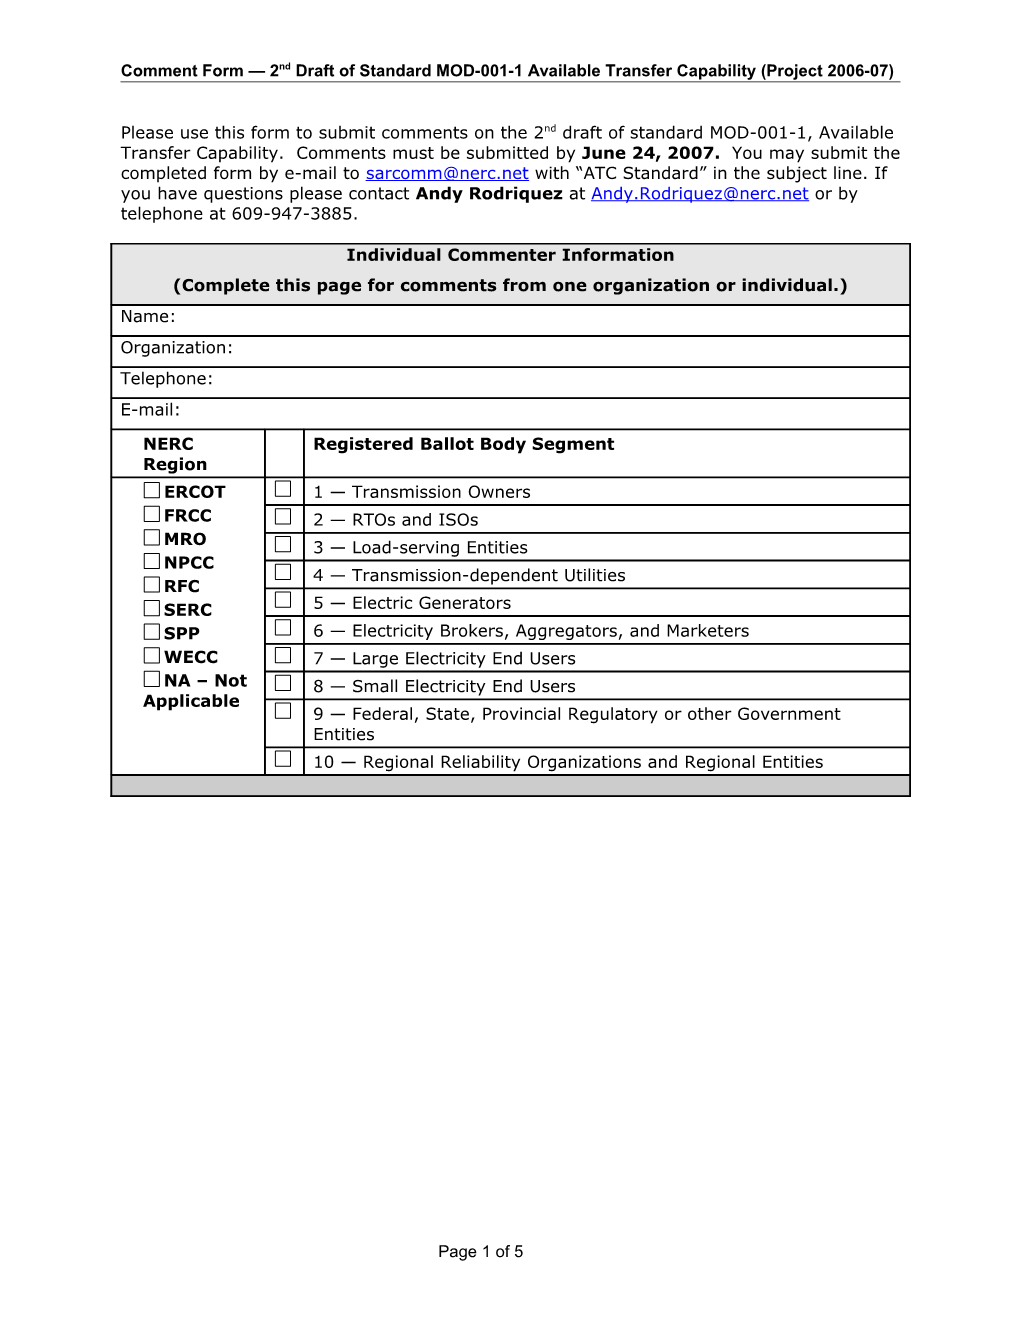 Comment Form 2Nddraft of Standard MOD-001-1 Available Transfer Capability (Project 2006-07)